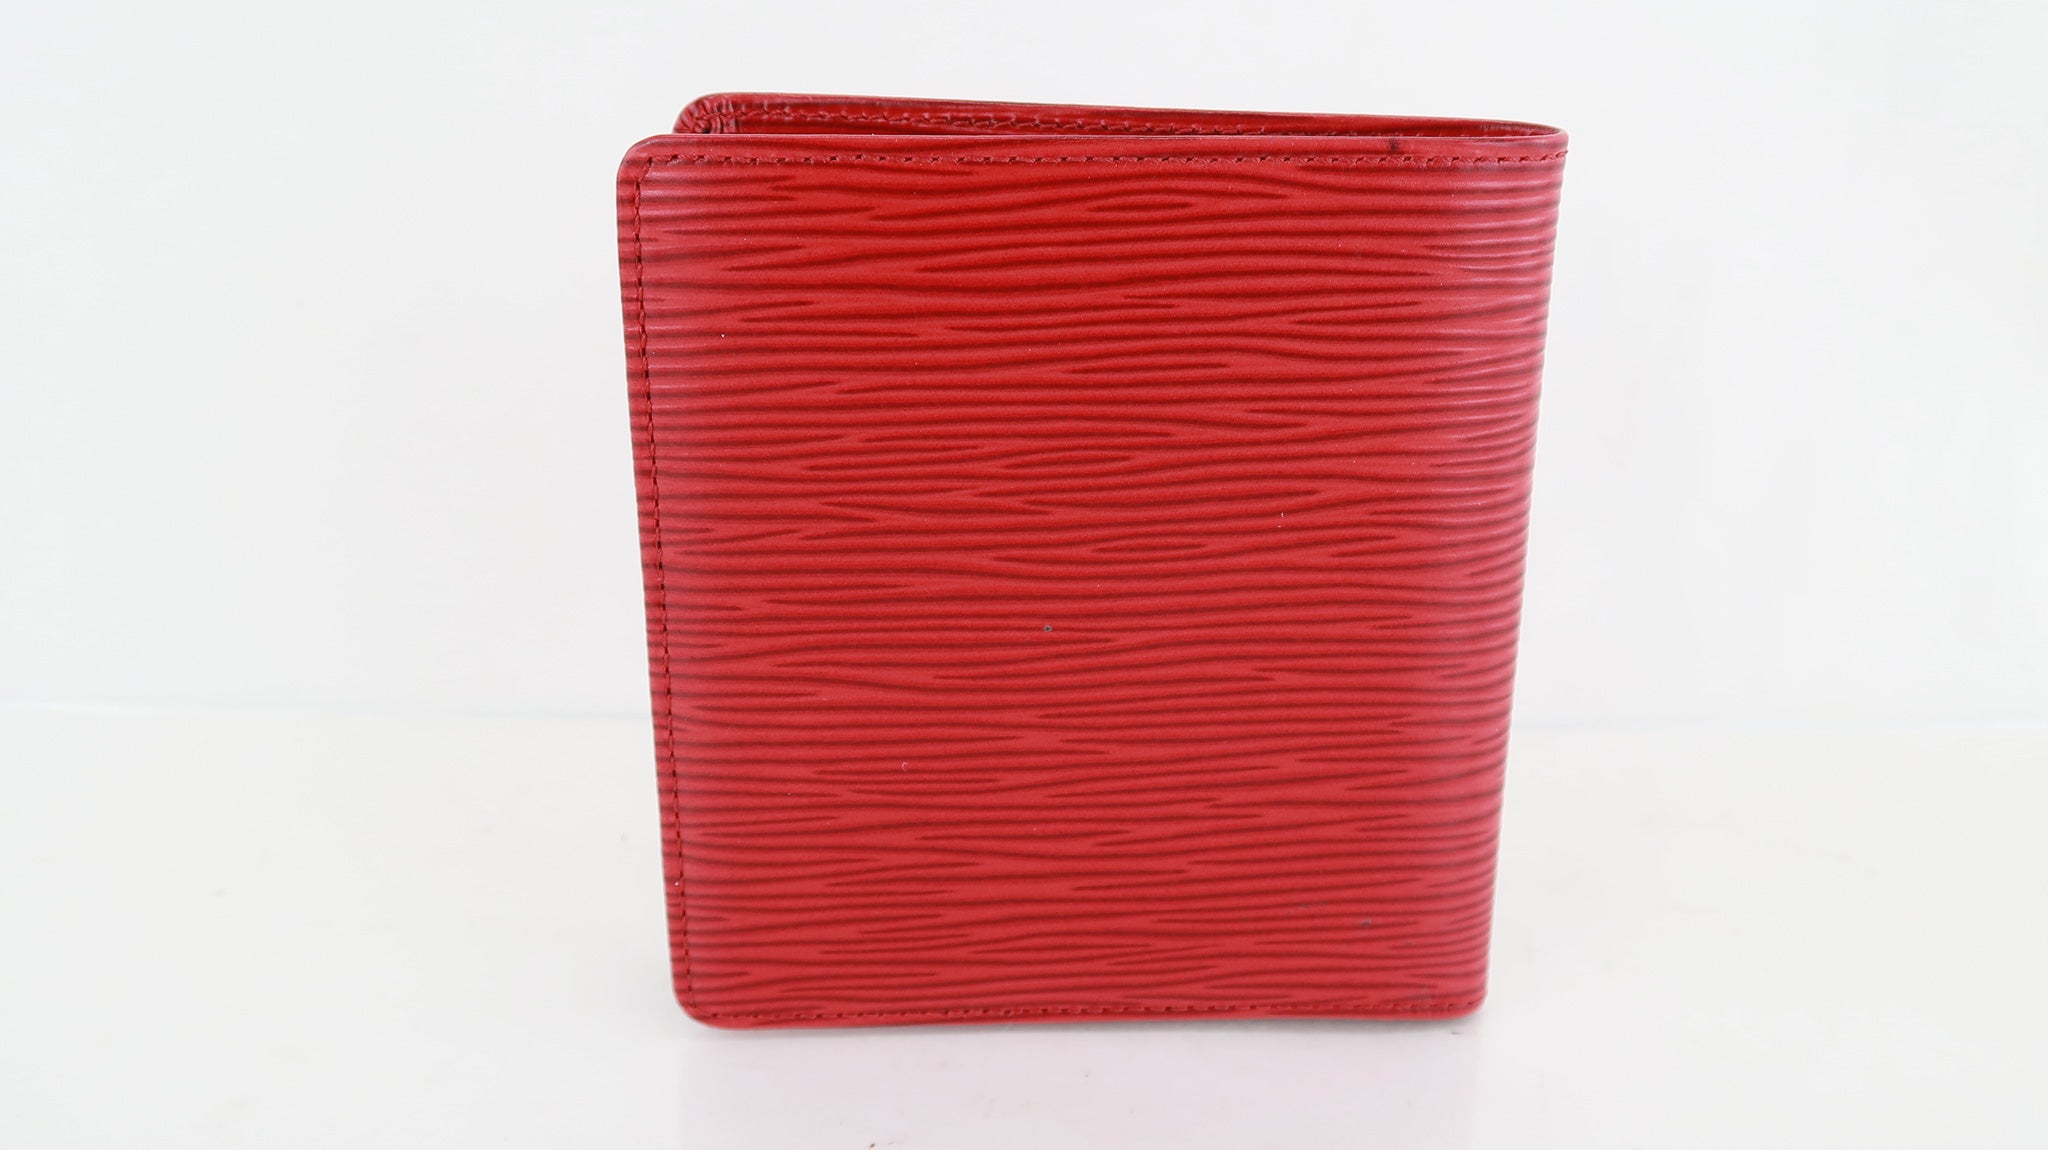 Louis Vuitton, Bags, Louis Vuitton Epi Leather Key Pouch Credit Card  Holder In Red